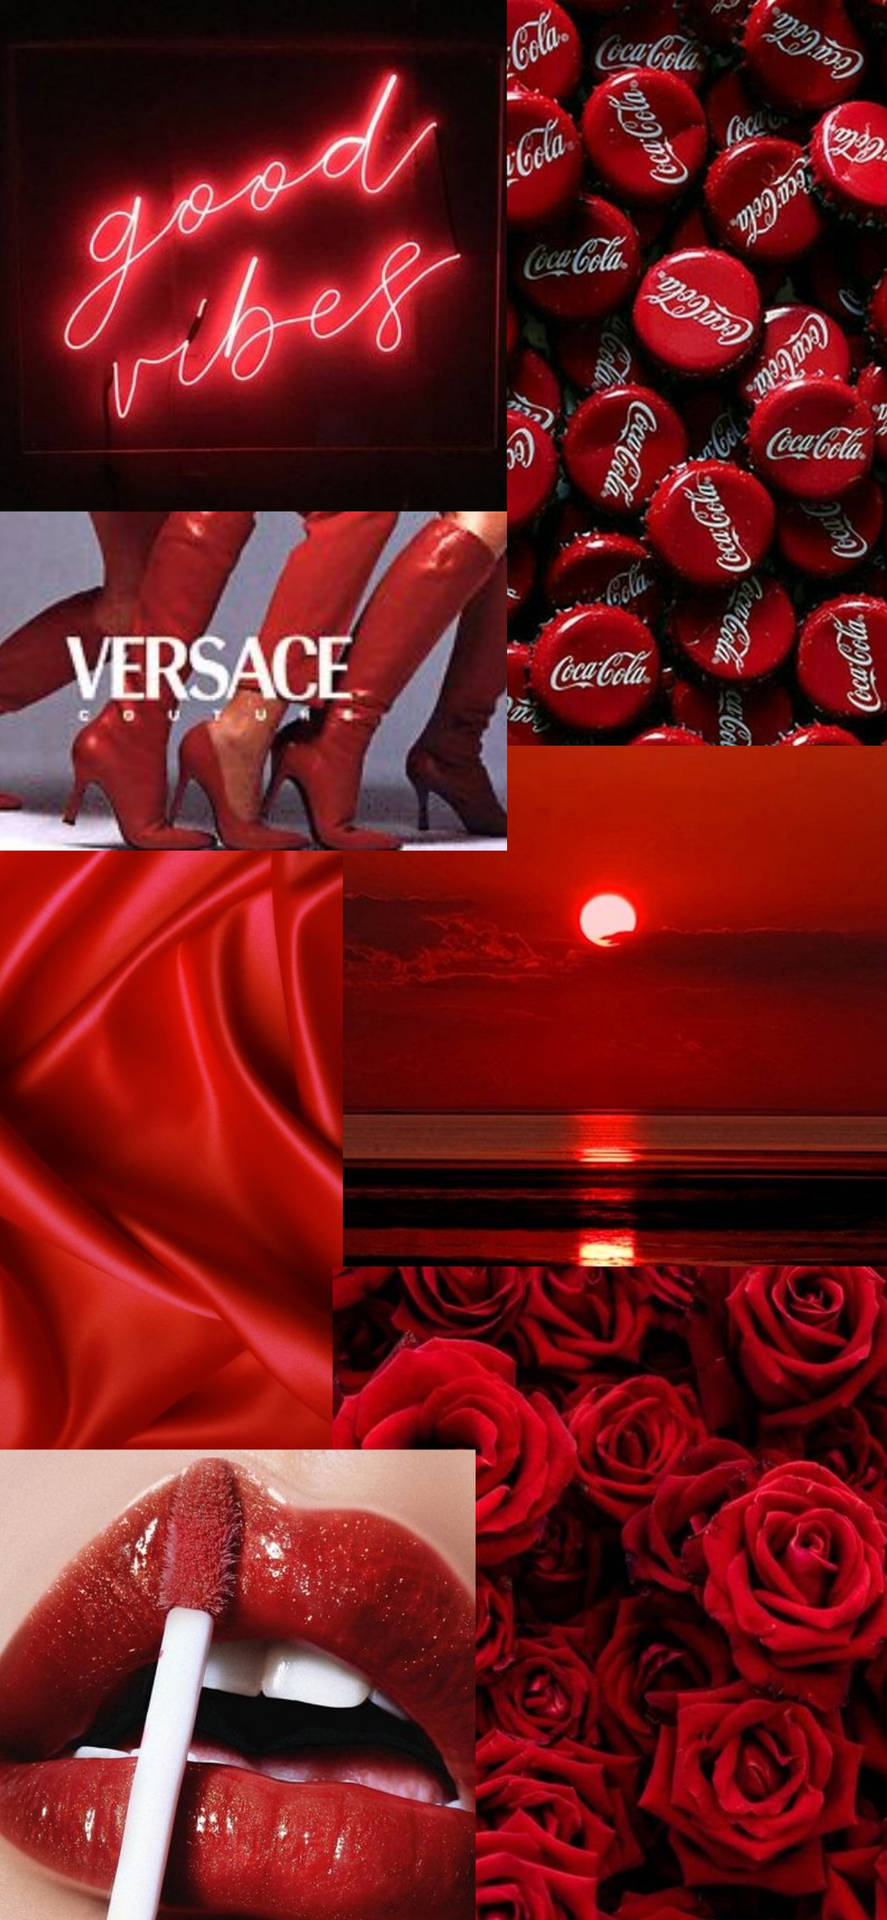 Versace Glossy Red Aesthetic Iphone